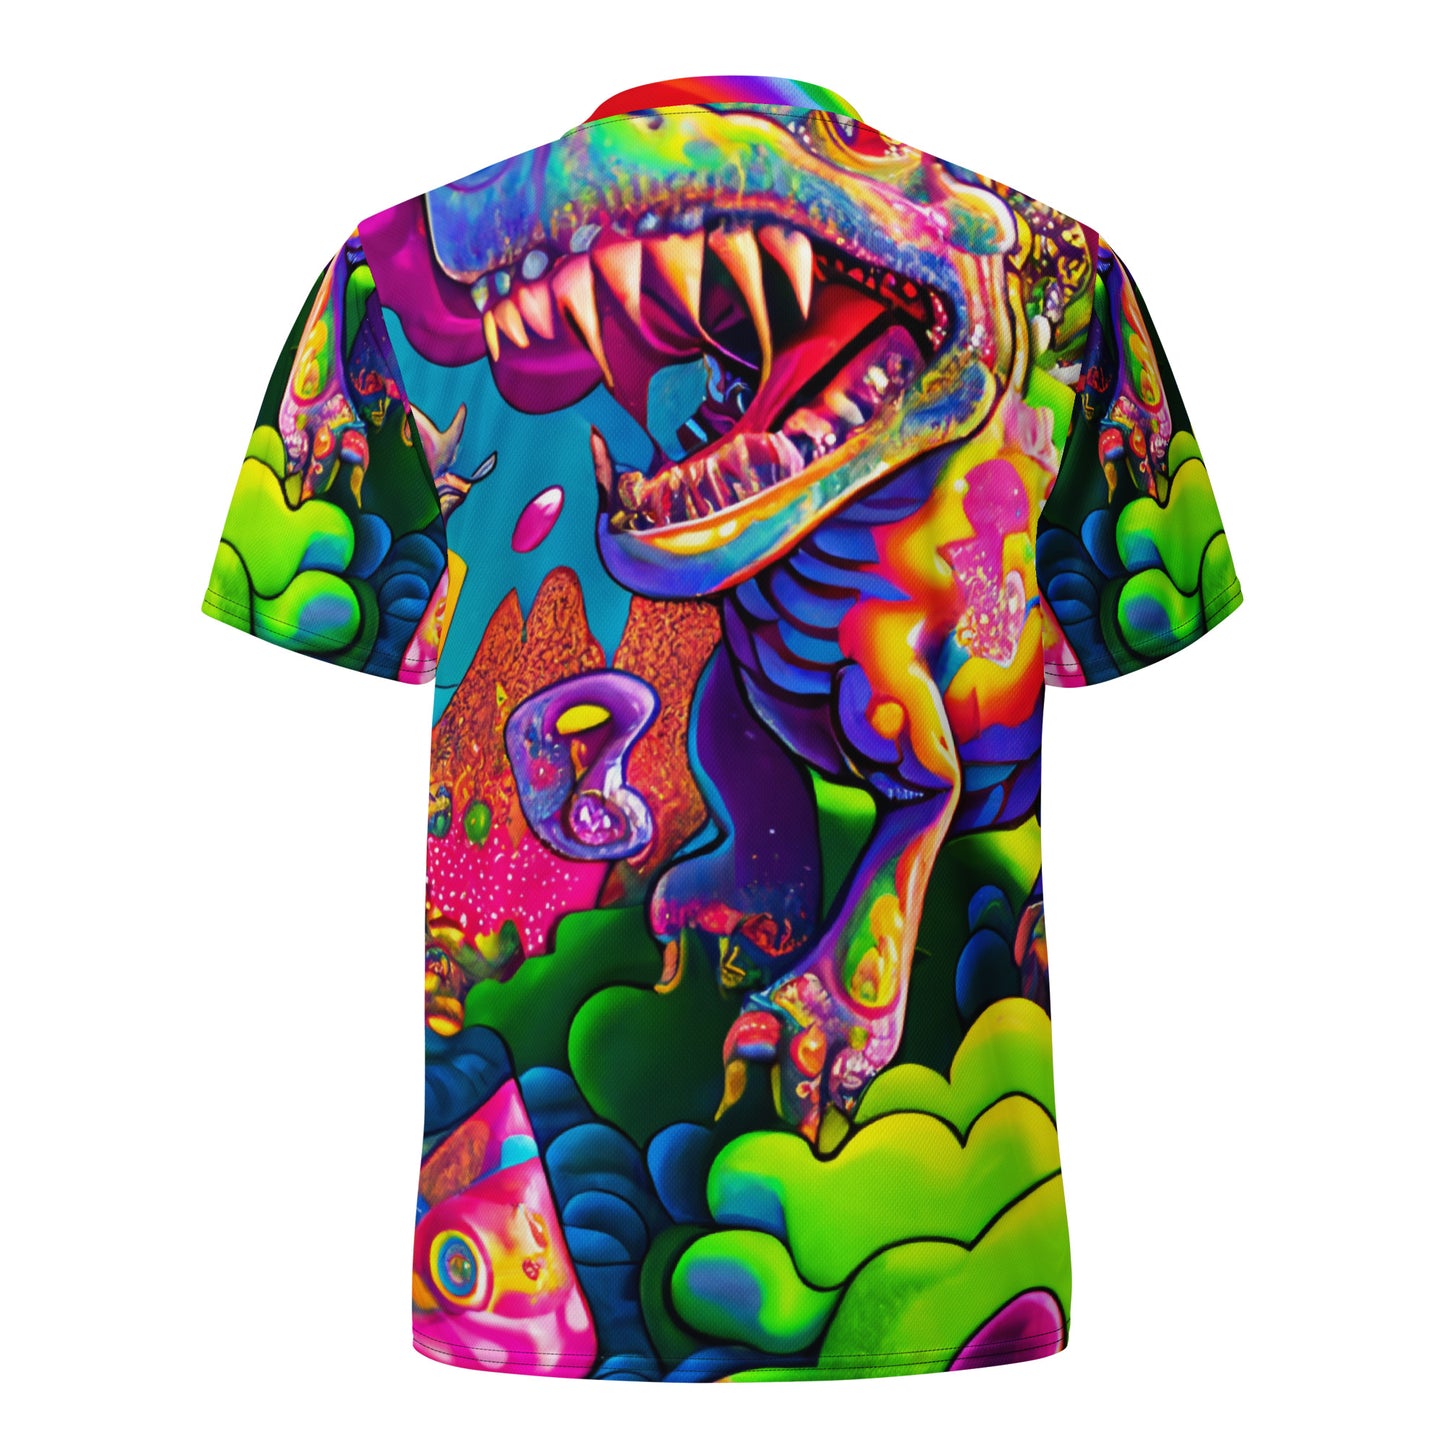 Dino Trip 1.0 Recycled unisex sports jersey